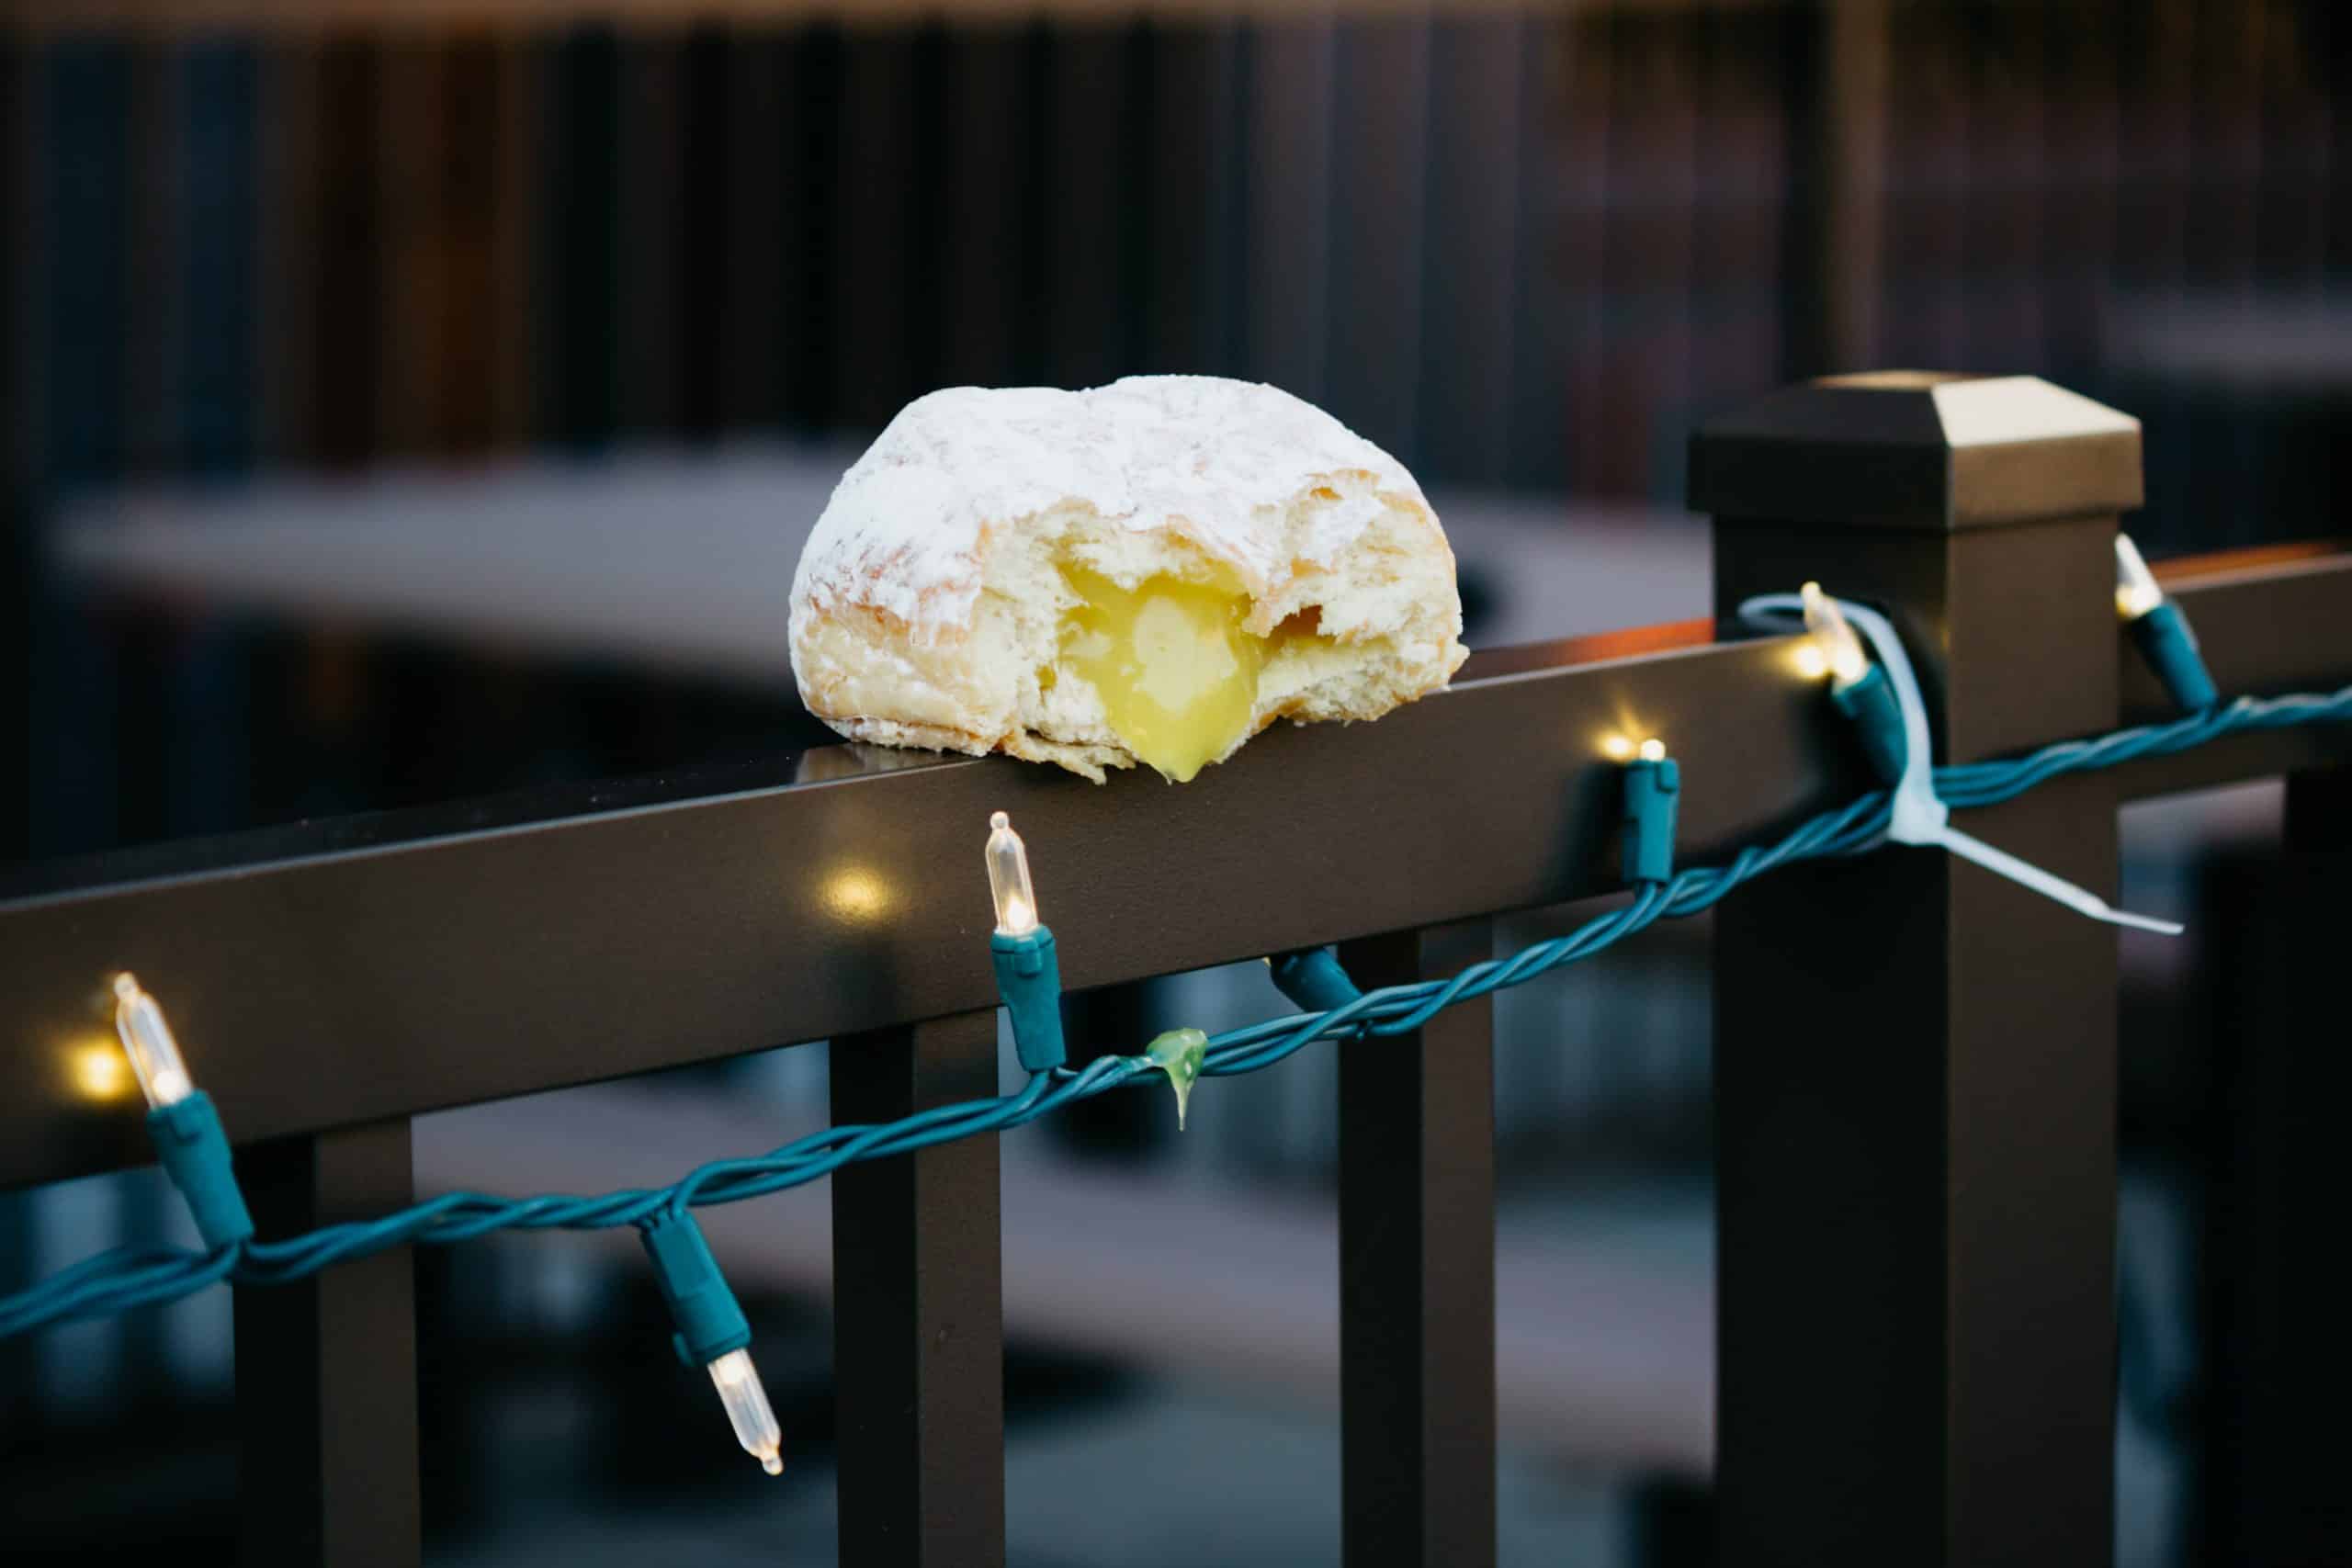 Donut with bite taken out of the, sitting on a railing, dripping filling onto xmas lights.